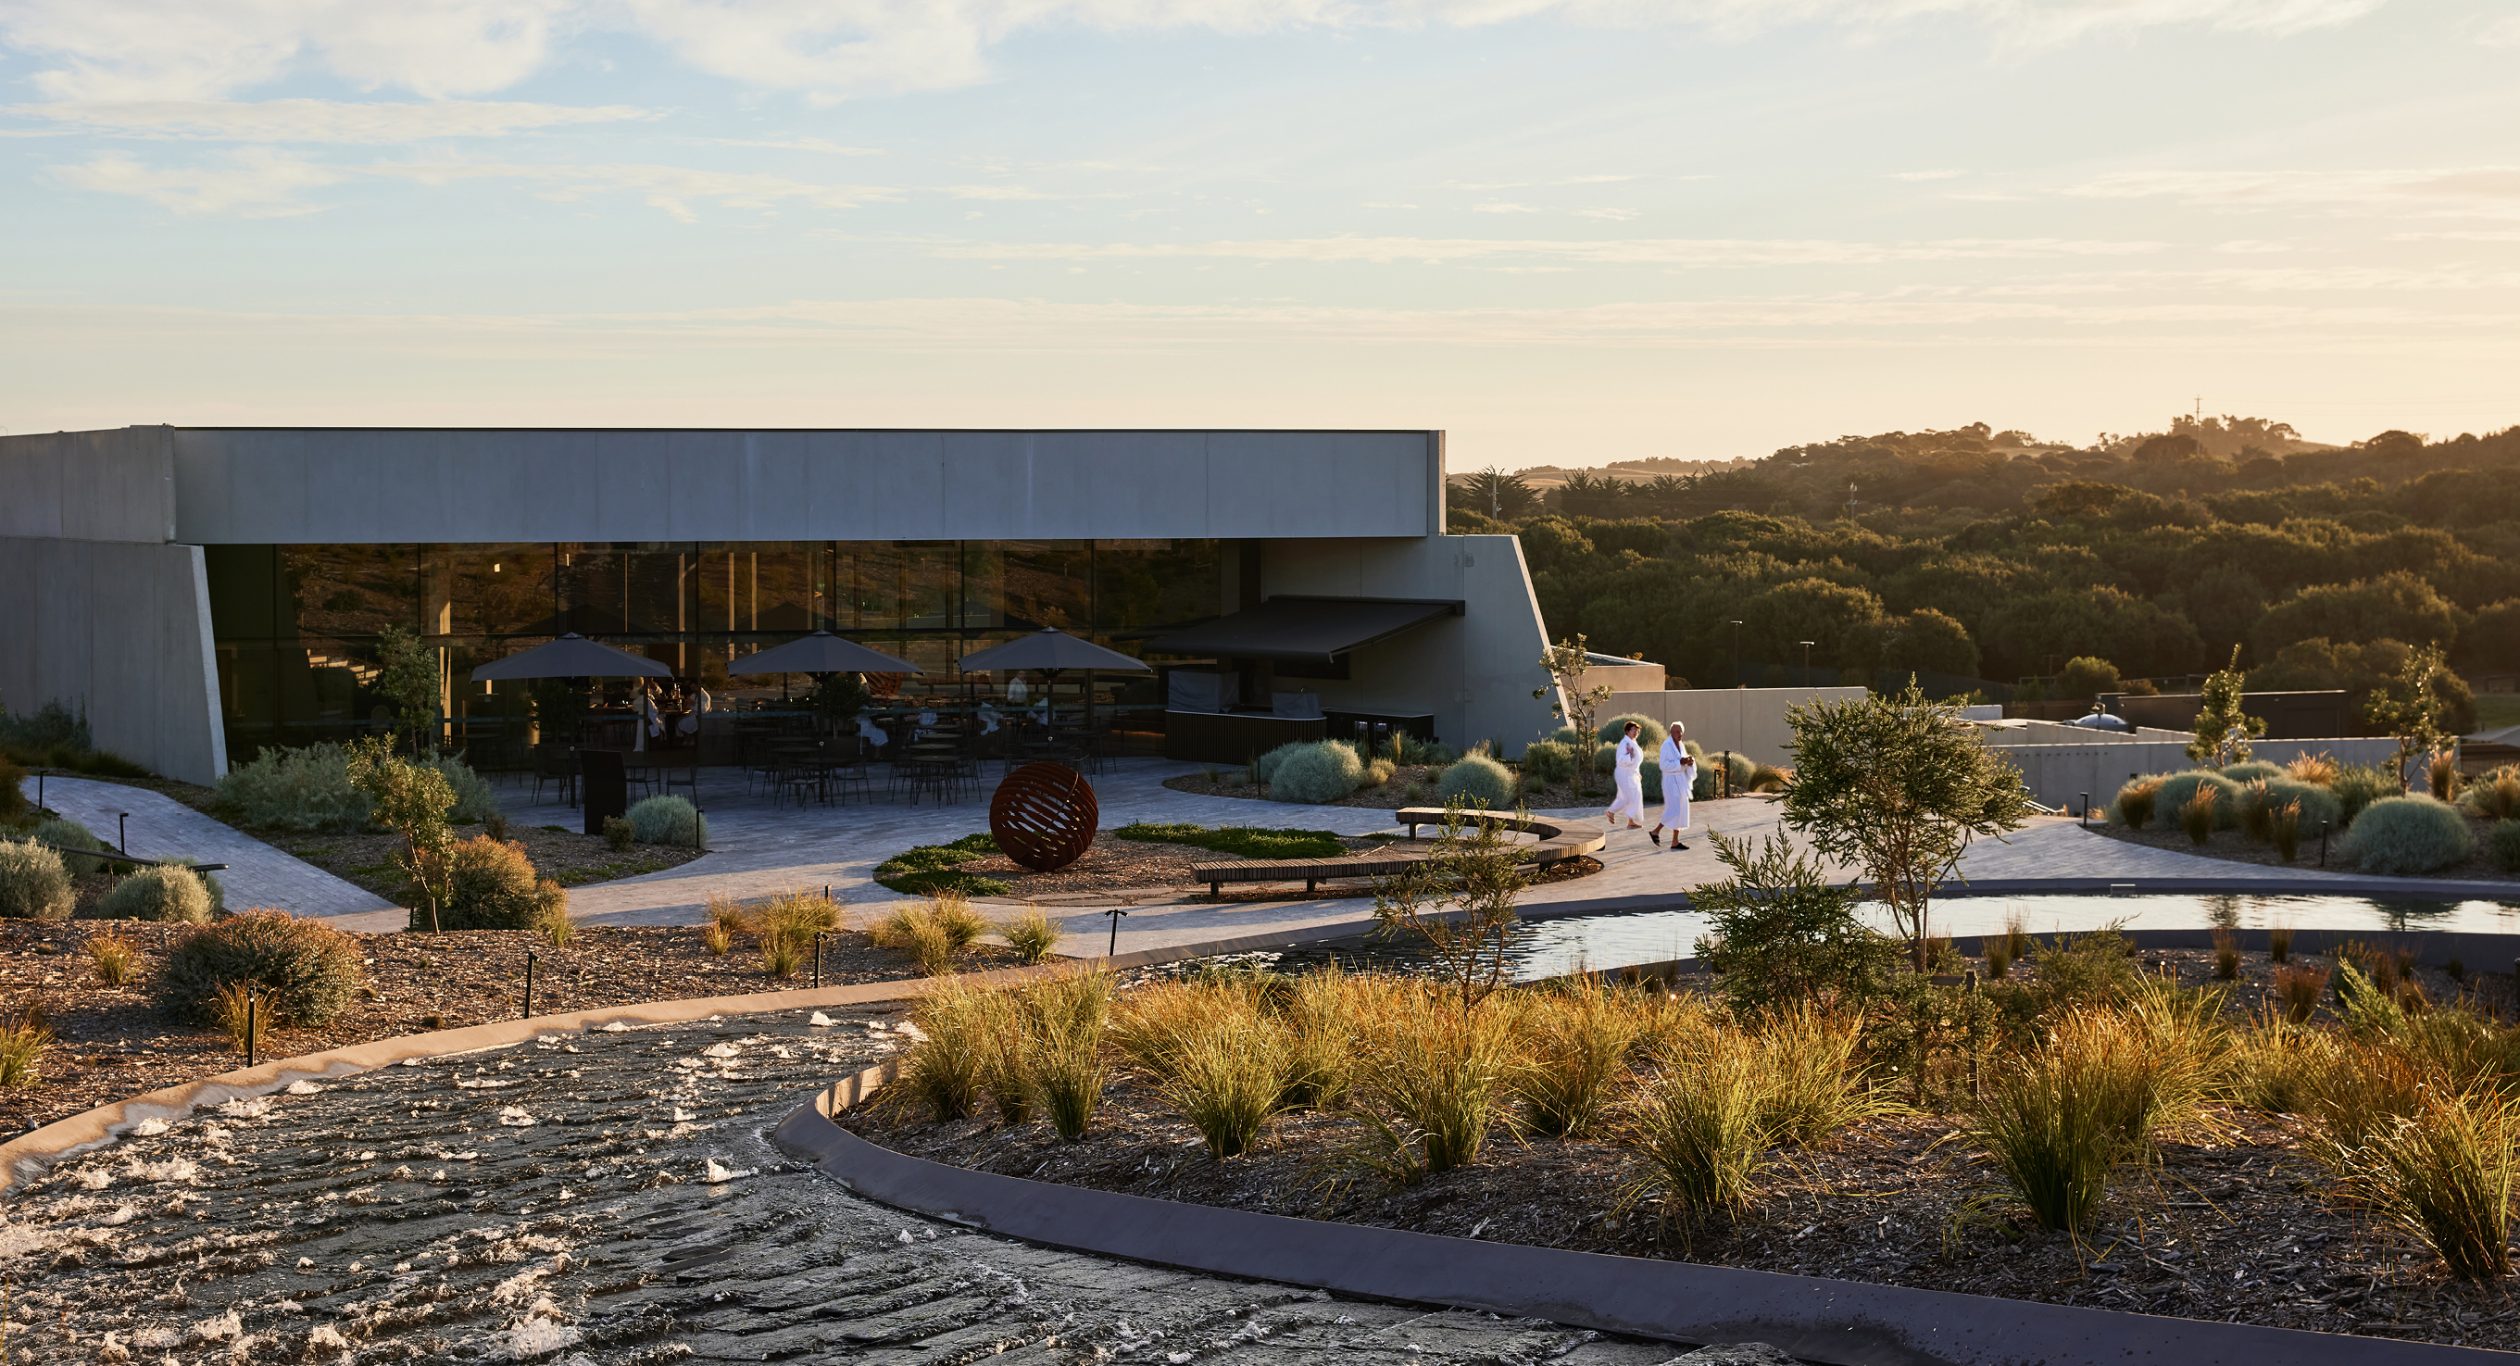 A photo of Alba Thermal Springs looking back towards the main building across the central curved water feature called "The Rapids" - two bathers in white bathrobes walk past a sculpture made from corten steel with the restaurant "Thyme" in the background and small wayfinding signs at the key decision points - in the foreground and background is a landscape of endemic plants ﻿that was designed by the landscape architect Mala.